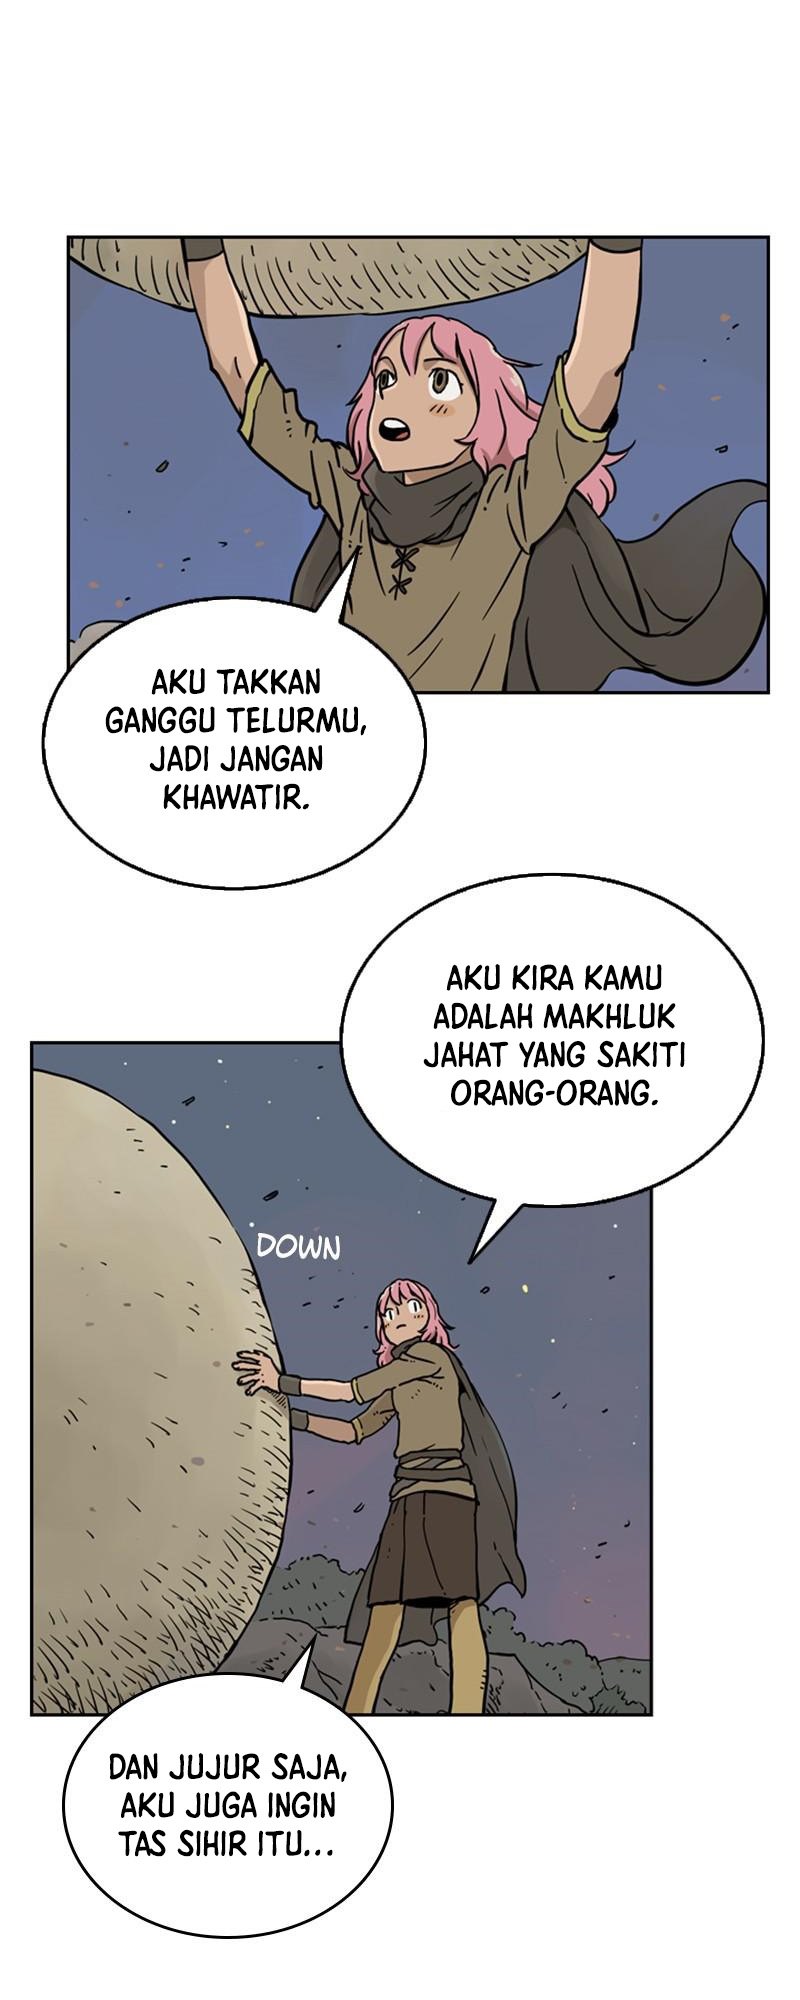 Mage Again Chapter 06